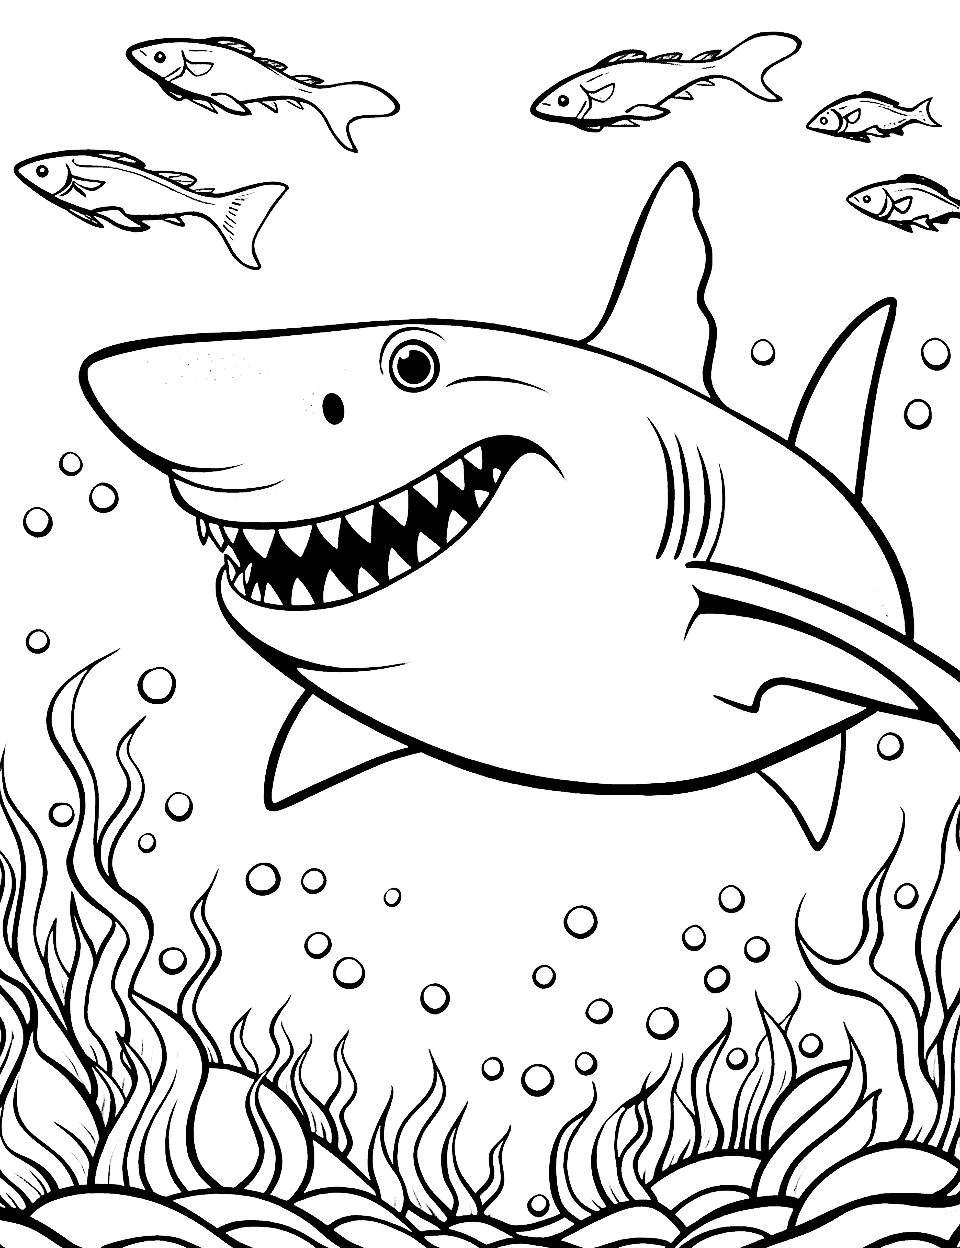 Fish Coloring Book For Kids: Fish Coloring Pages Fantastic Gift For Boys &  Girls